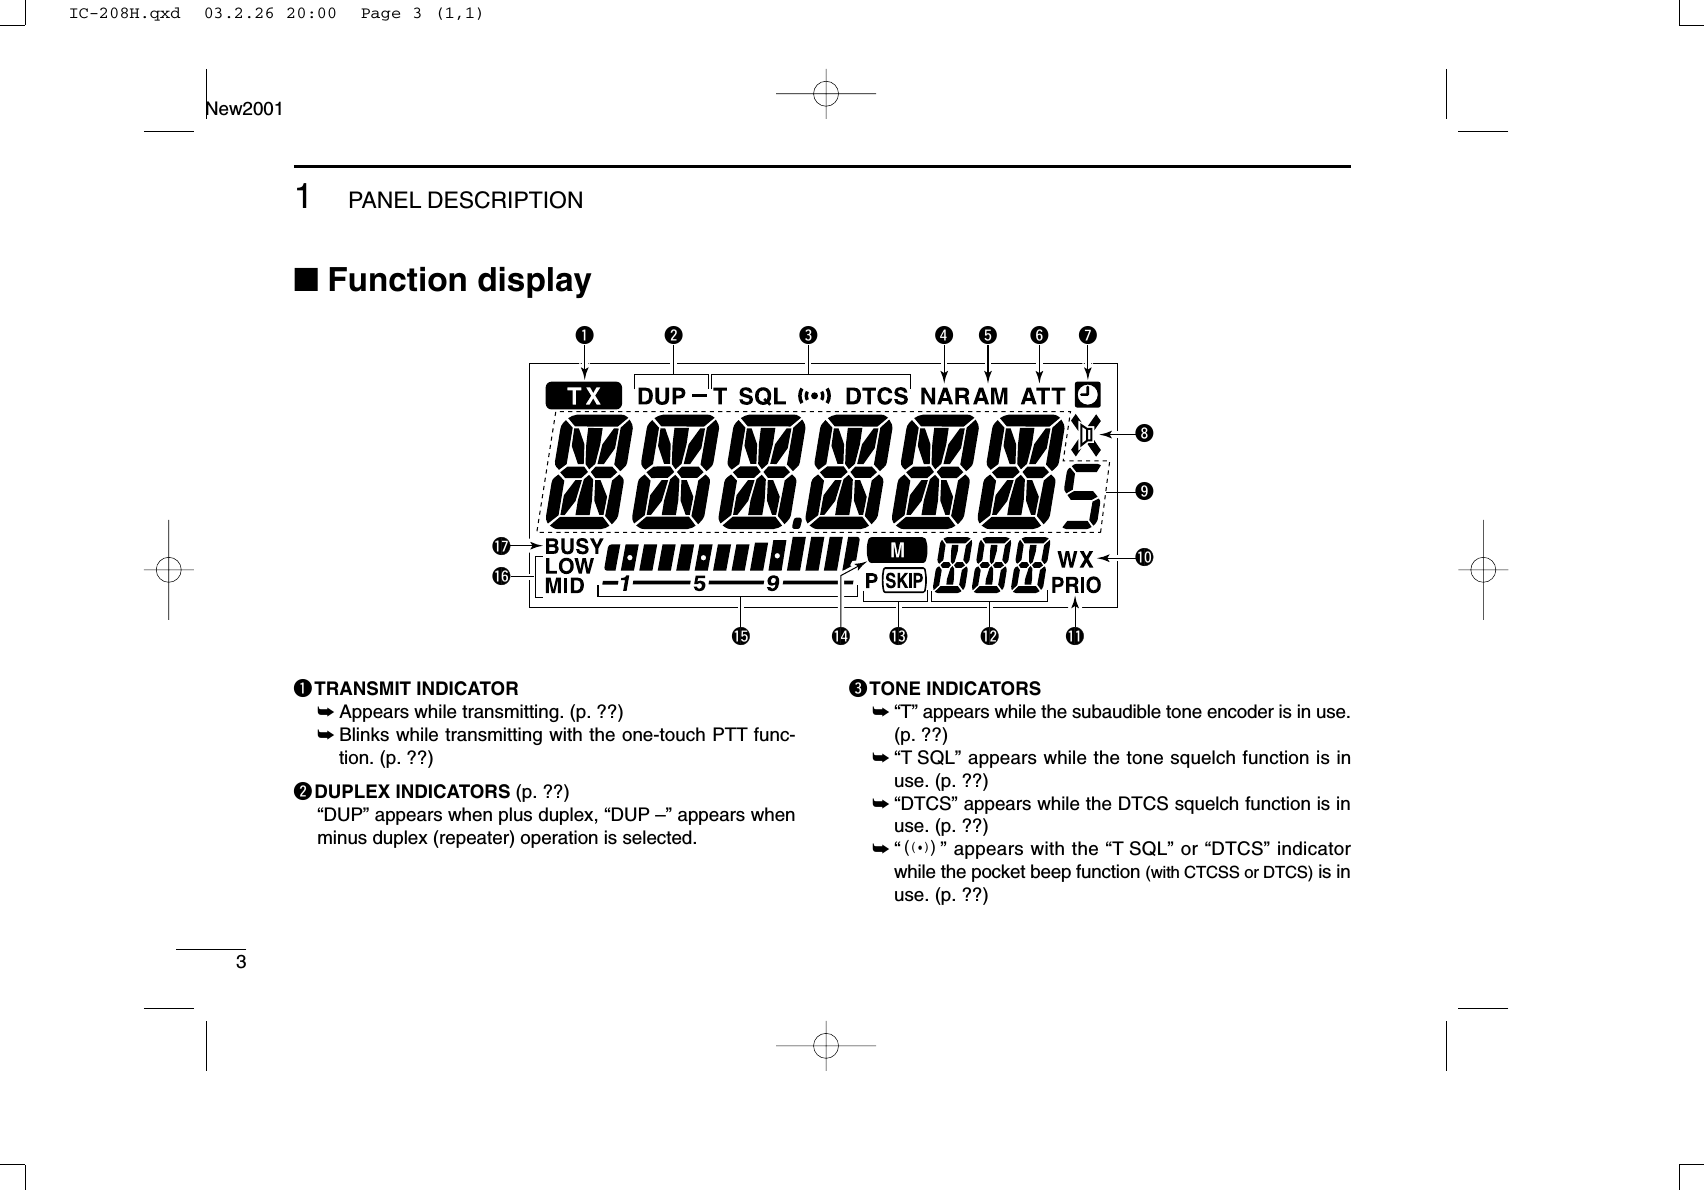 31PANEL DESCRIPTIONNew2001■Function displayqTRANSMIT INDICATOR➥Appears while transmitting. (p. ??)➥Blinks while transmitting with the one-touch PTT func-tion. (p. ??)wDUPLEX INDICATORS (p. ??)“DUP” appears when plus duplex, “DUP –” appears whenminus duplex (repeater) operation is selected.eTONE INDICATORS➥“T” appears while the subaudible tone encoder is in use.(p. ??)➥“T SQL” appears while the tone squelch function is inuse. (p. ??)➥“DTCS” appears while the DTCS squelch function is inuse. (p. ??)➥“S” appears with the “T SQL” or “DTCS” indicatorwhile the pocket beep function (with CTCSS or DTCS) is inuse. (p. ??)q uir t y!1w e!0o!2!3!5!6!7!4IC-208H.qxd  03.2.26 20:00  Page 3 (1,1)